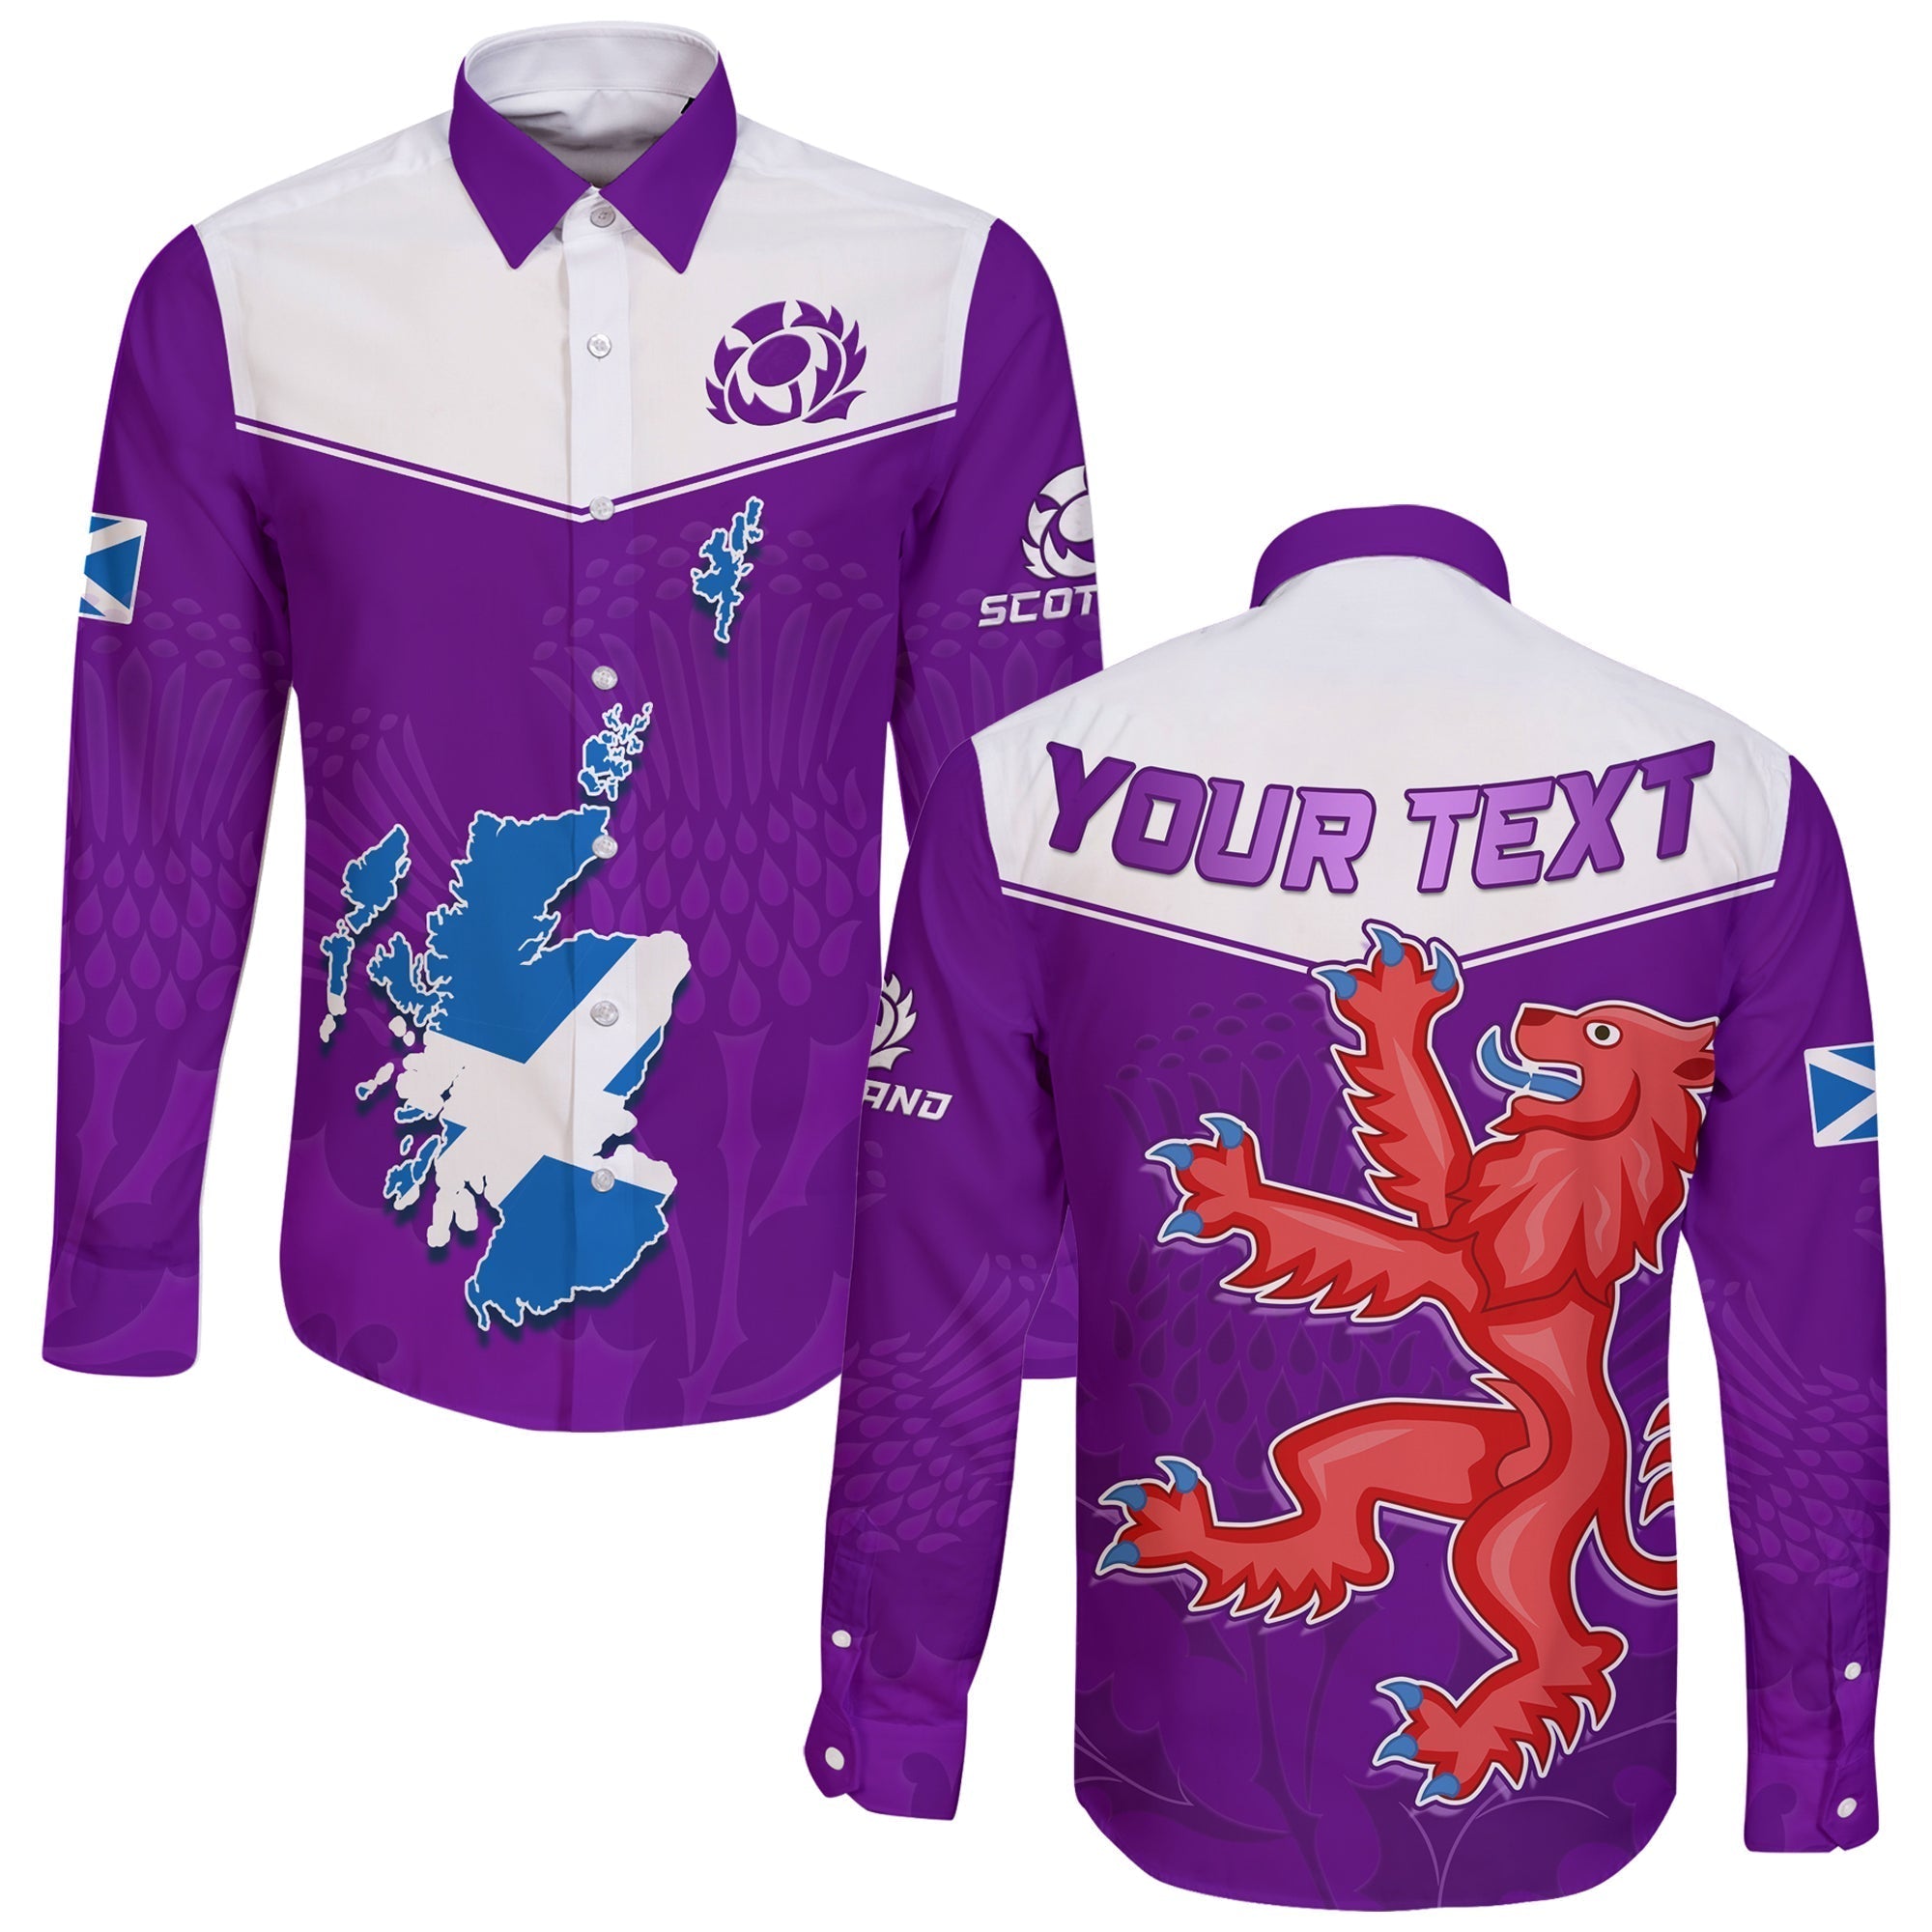 custom-personalised-scottish-rugby-long-sleeve-button-shirt-map-of-scotland-thistle-purple-version-lt14